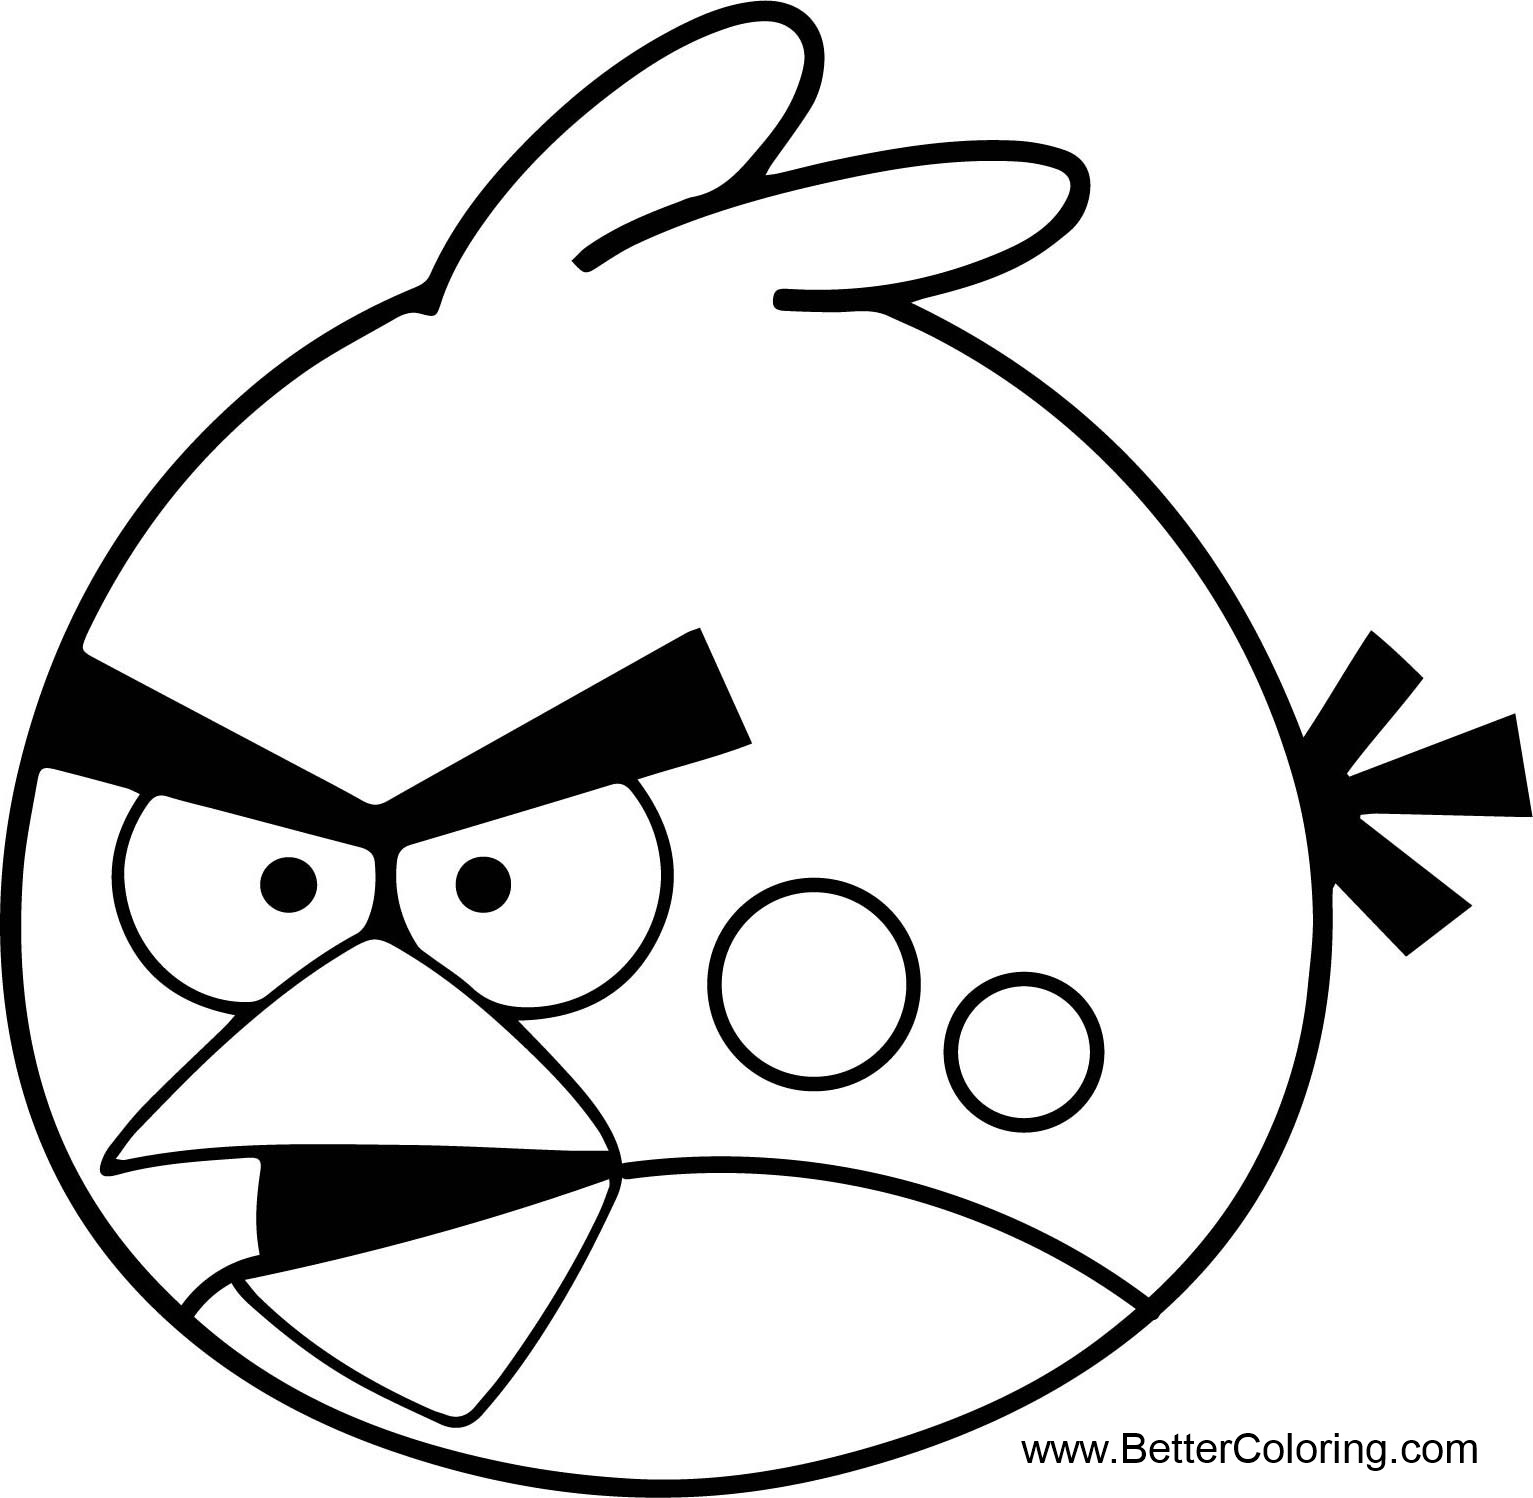 Angry Birds Coloring Pages Line Art - Free Printable Coloring Pages